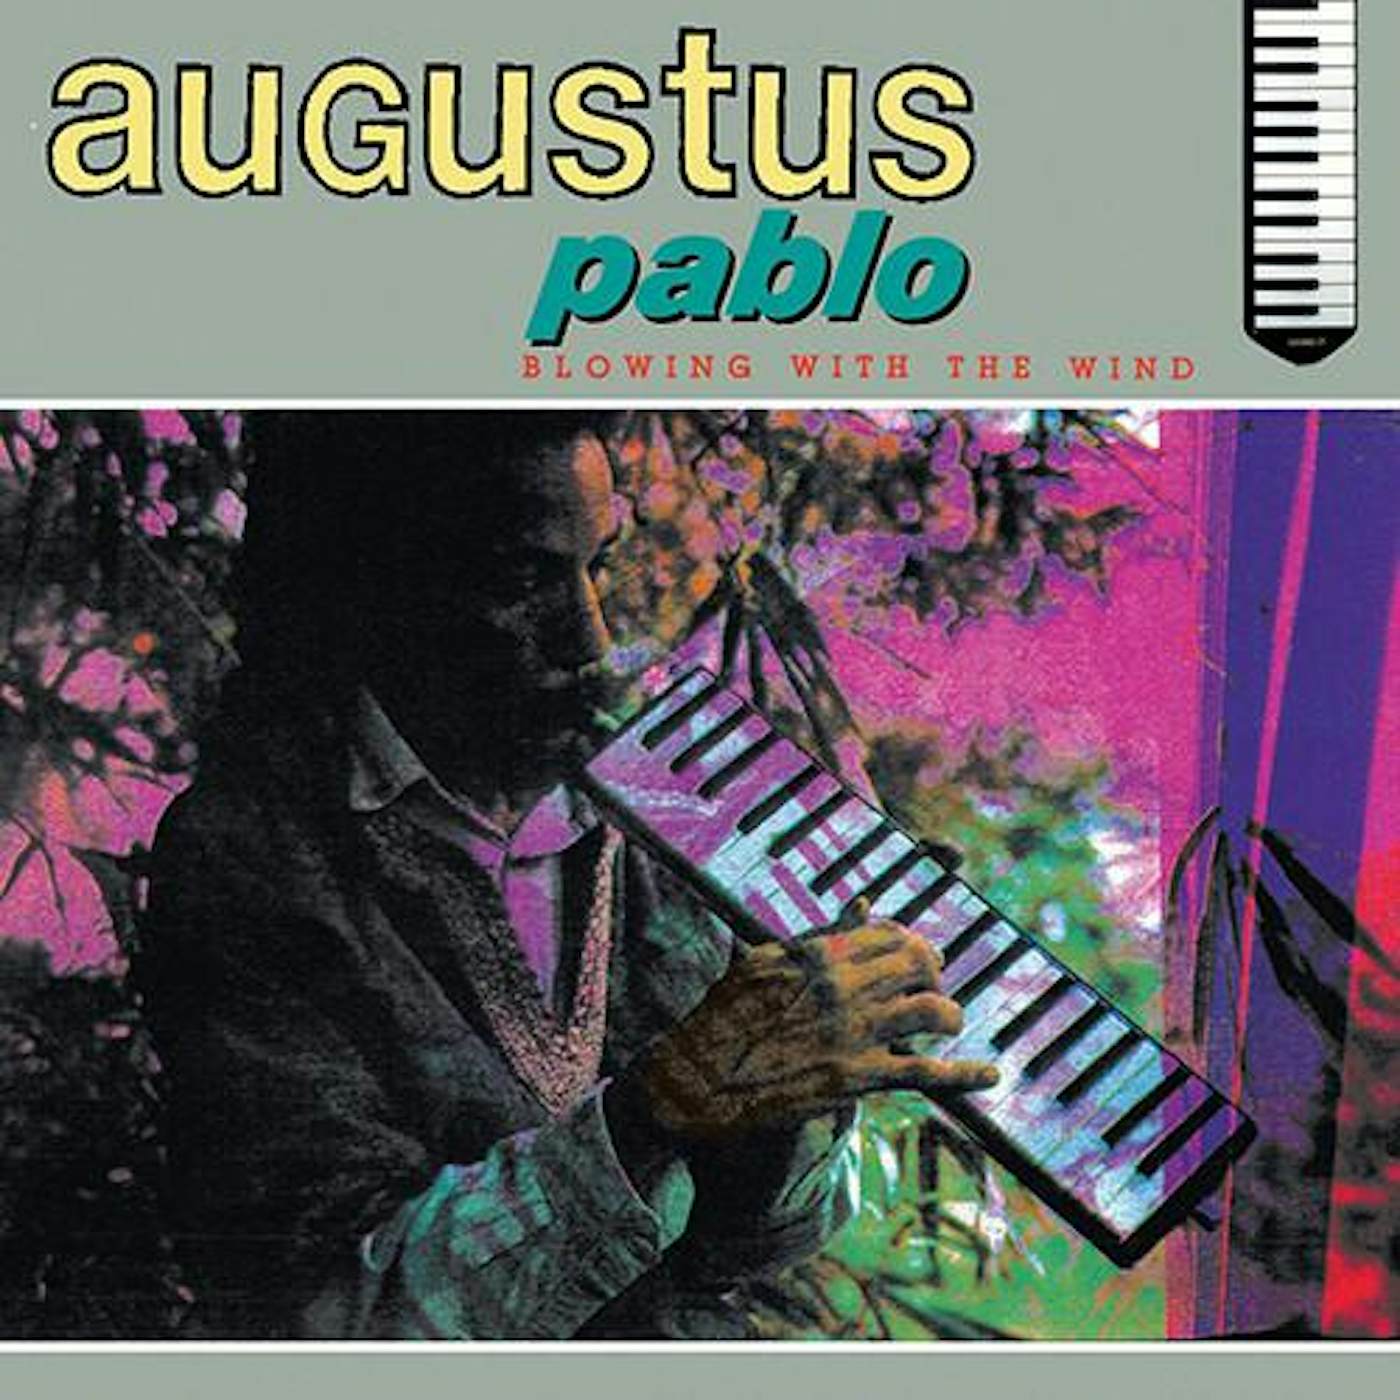 Augustus Pablo Blowing With The Wind Vinyl Record